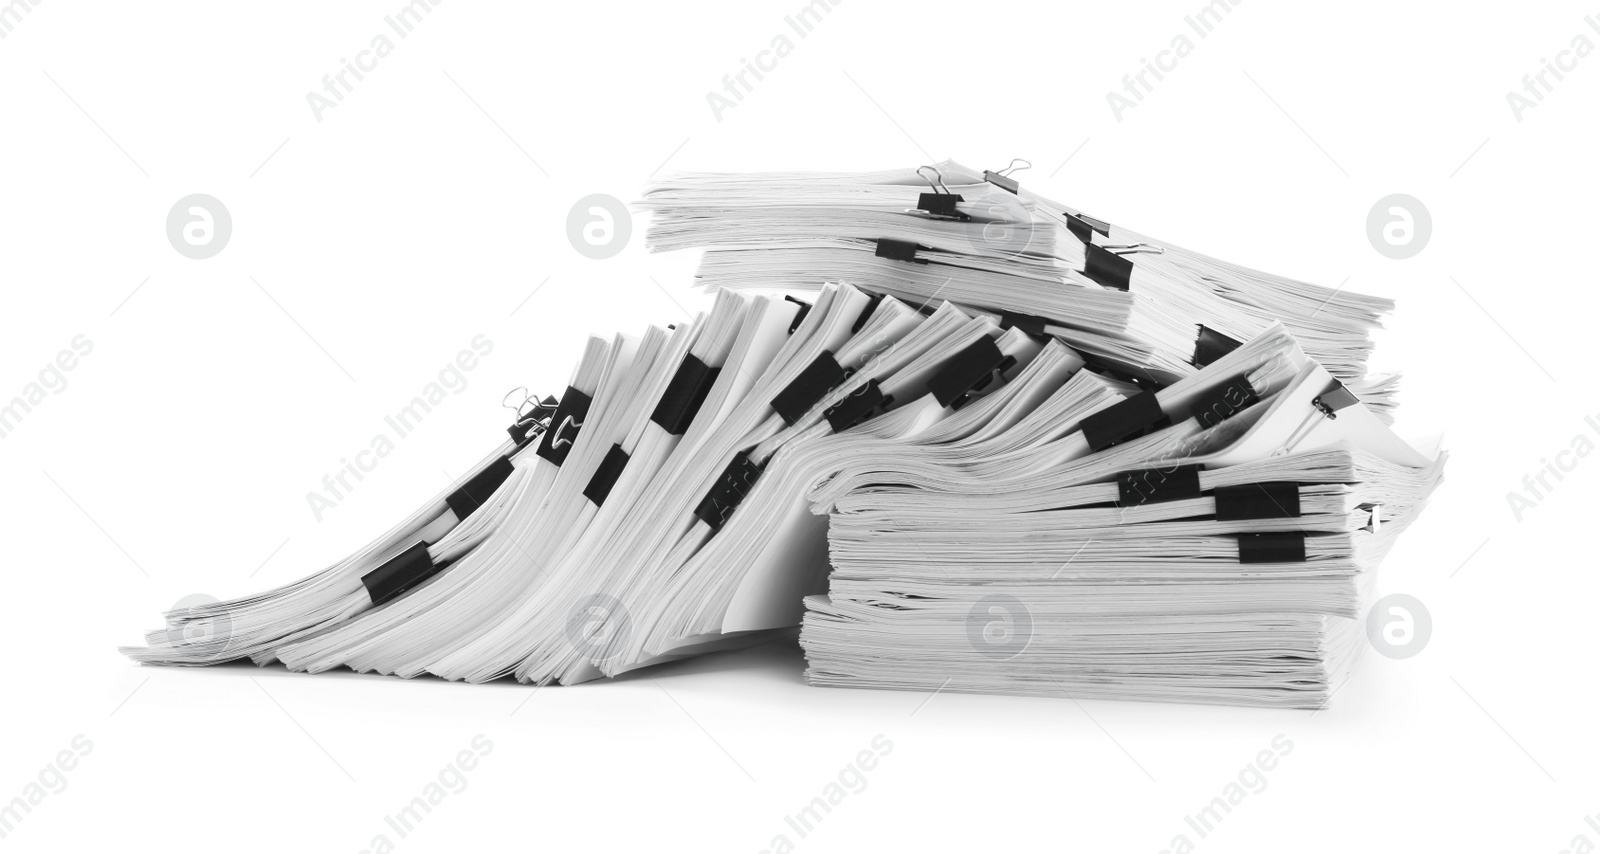 Photo of Pile of documents with binder clips on white background